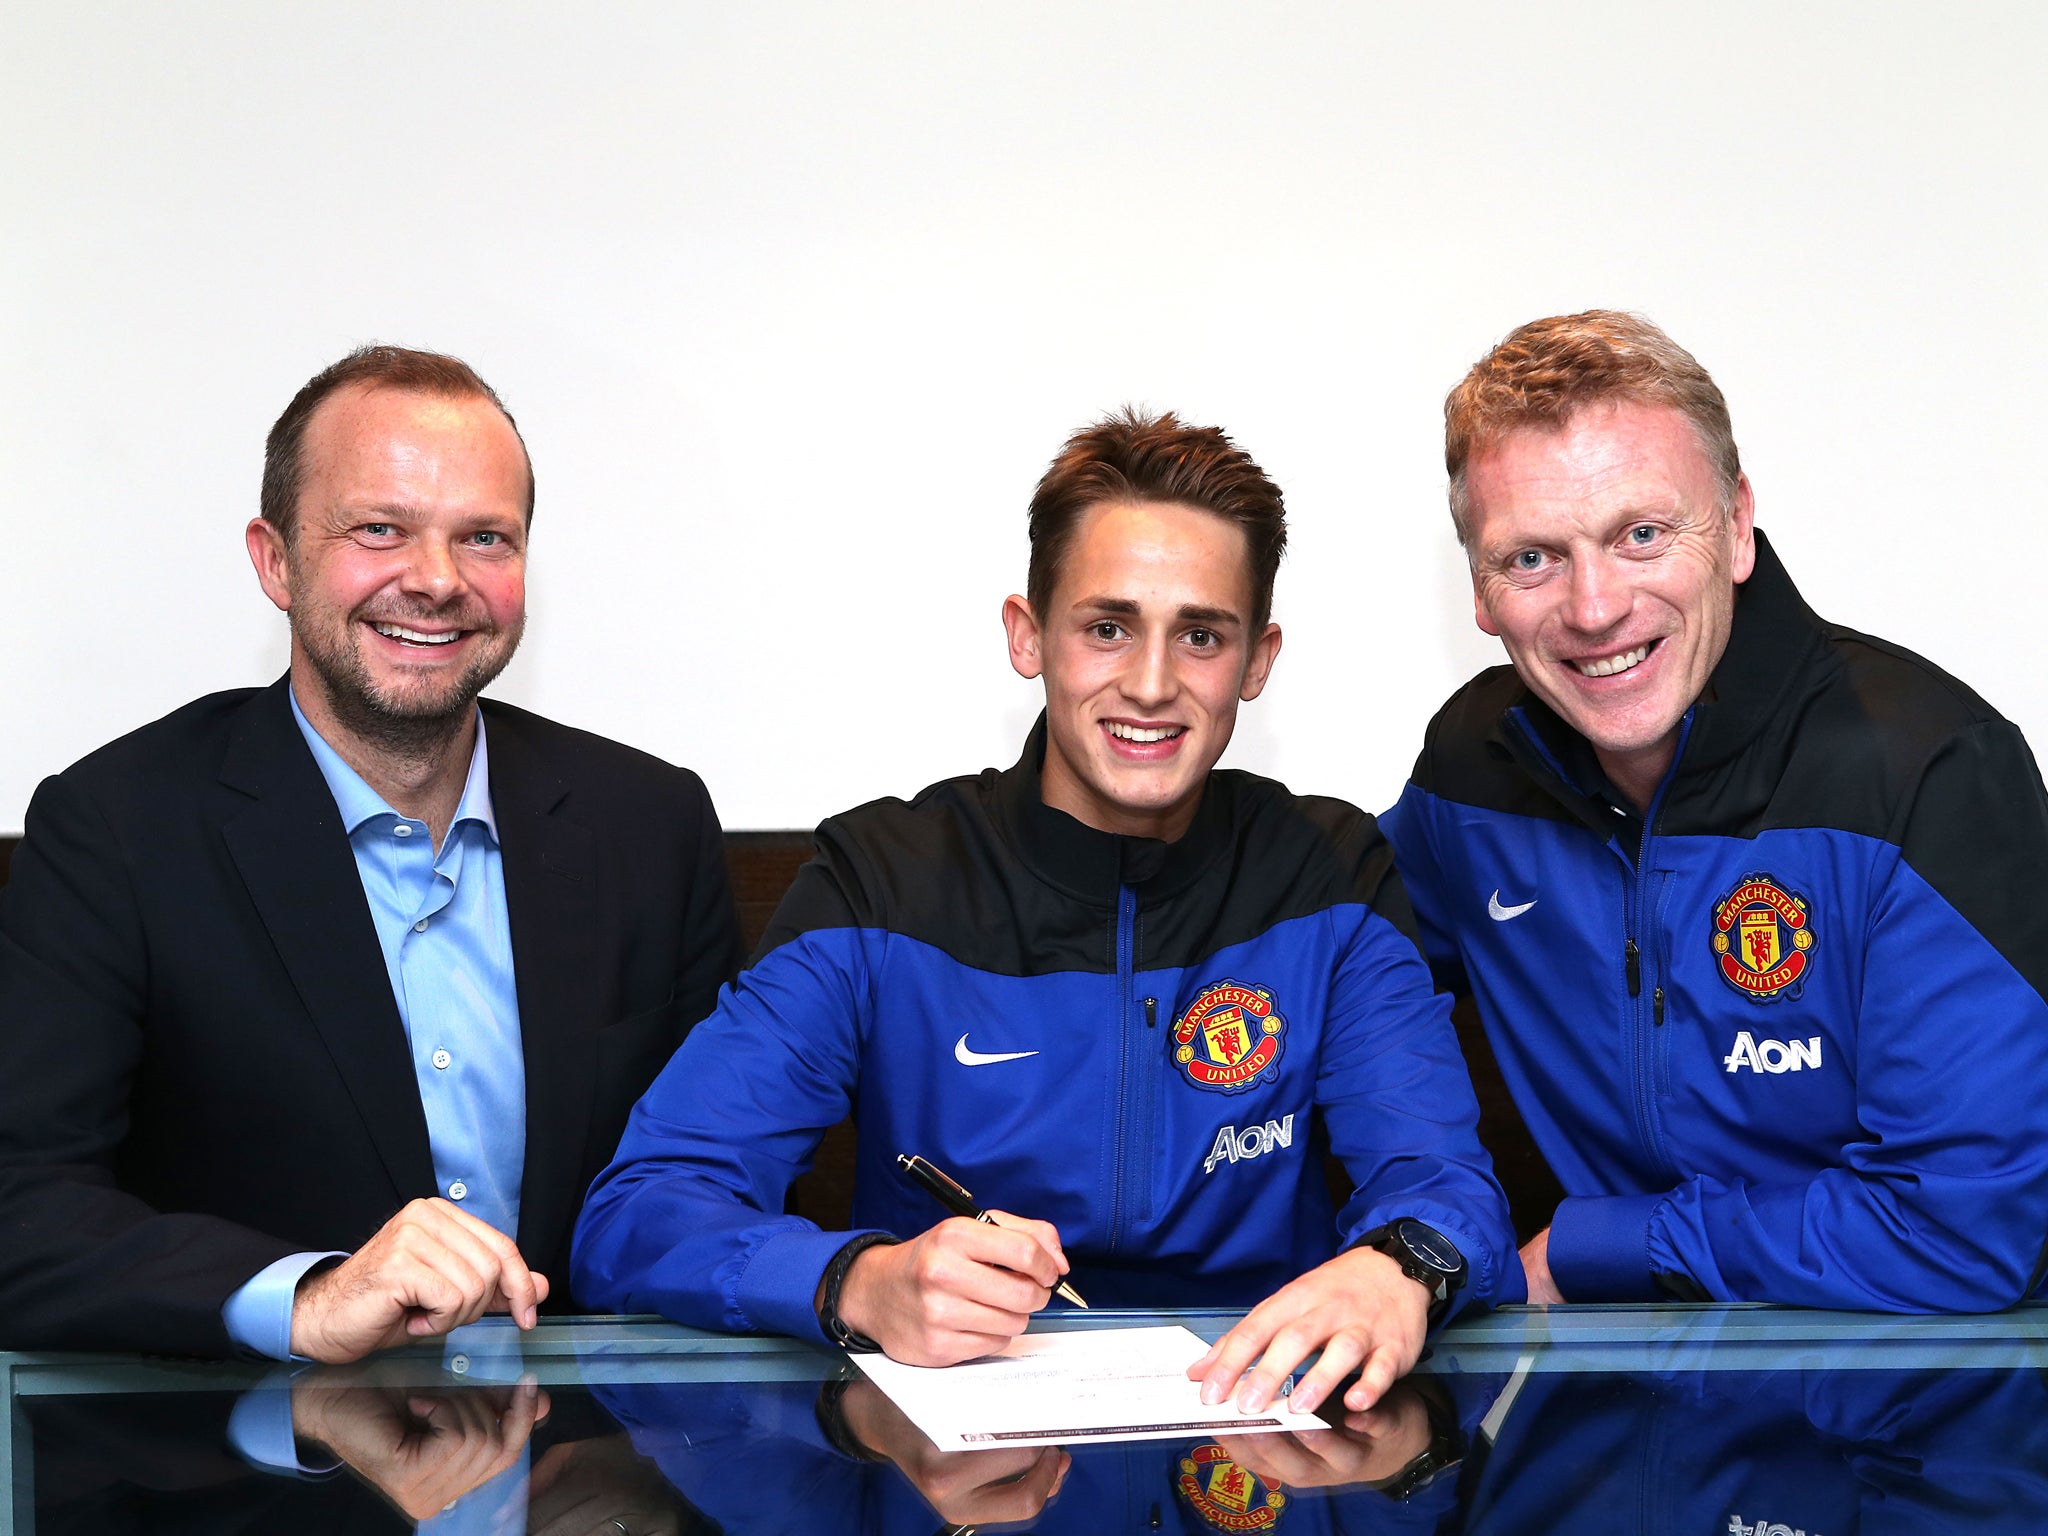 Adnan Januzaj (C) signs a new five-year contract with Manchester United alongside chief executive Ed Woodward (L) and manager David Moyes (R)